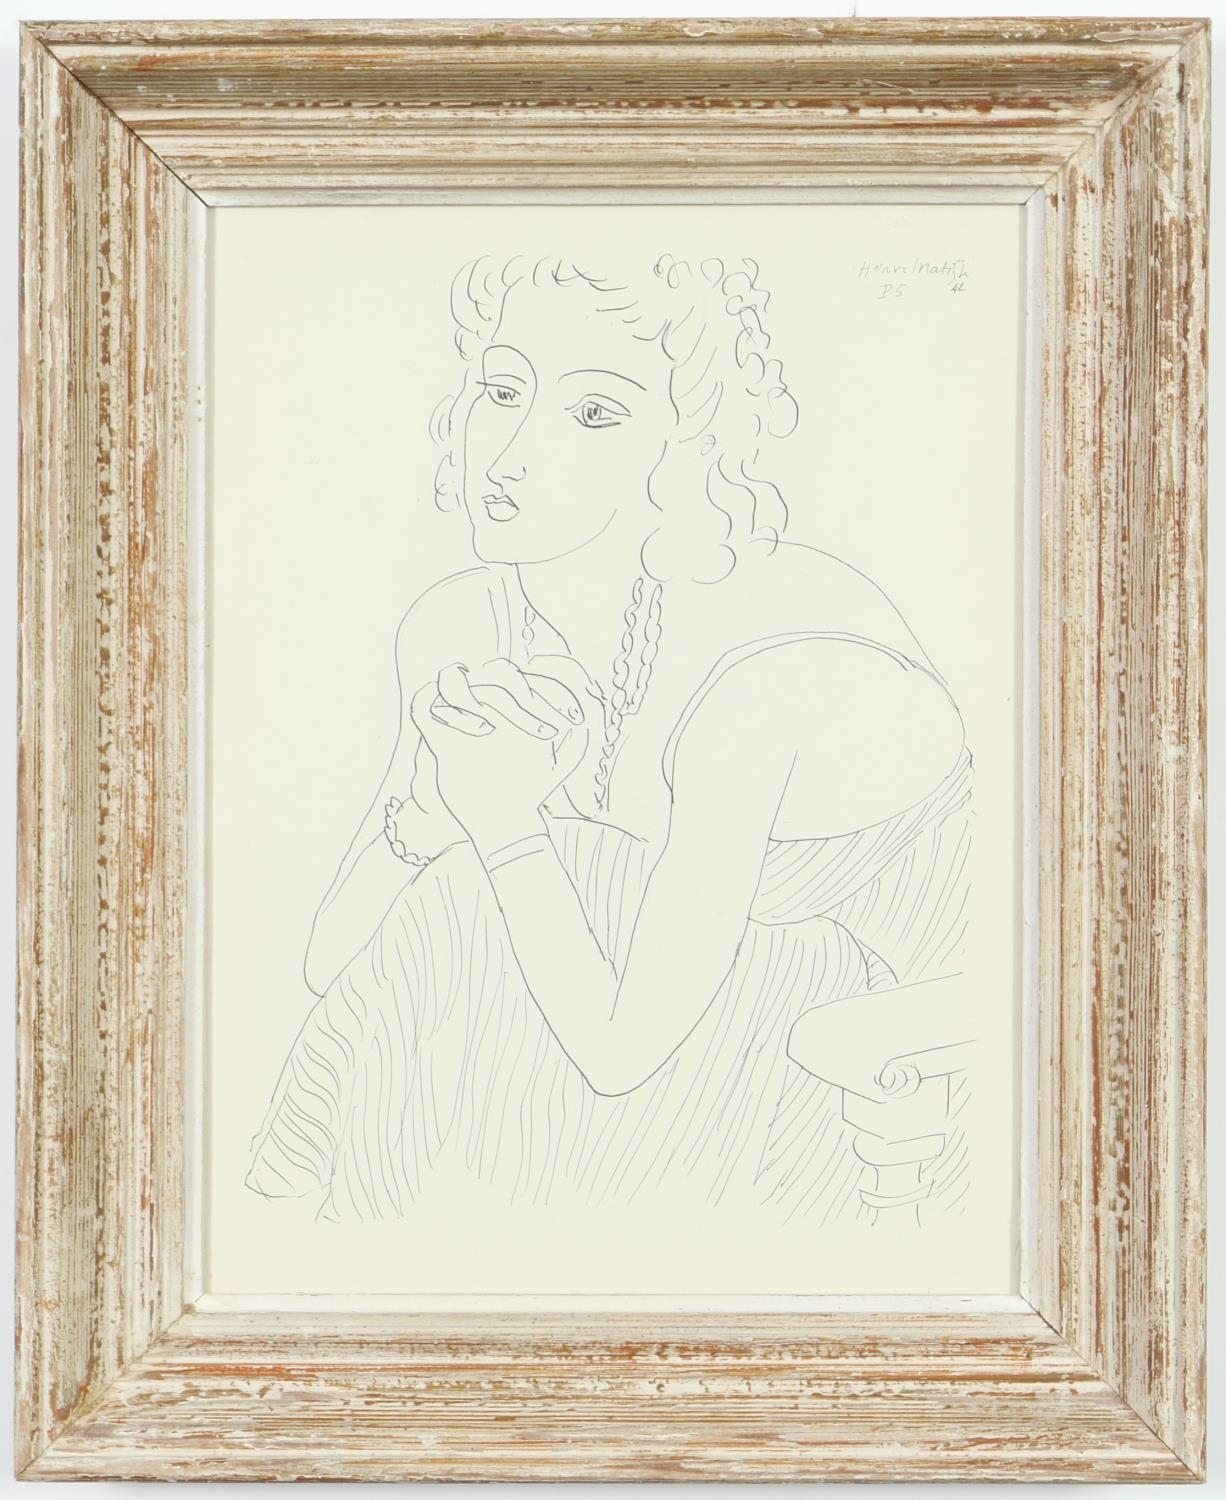 HENRI MATISSE, seated young woman, P5, rare collotype, signed in the plate 1943, printed by Martin